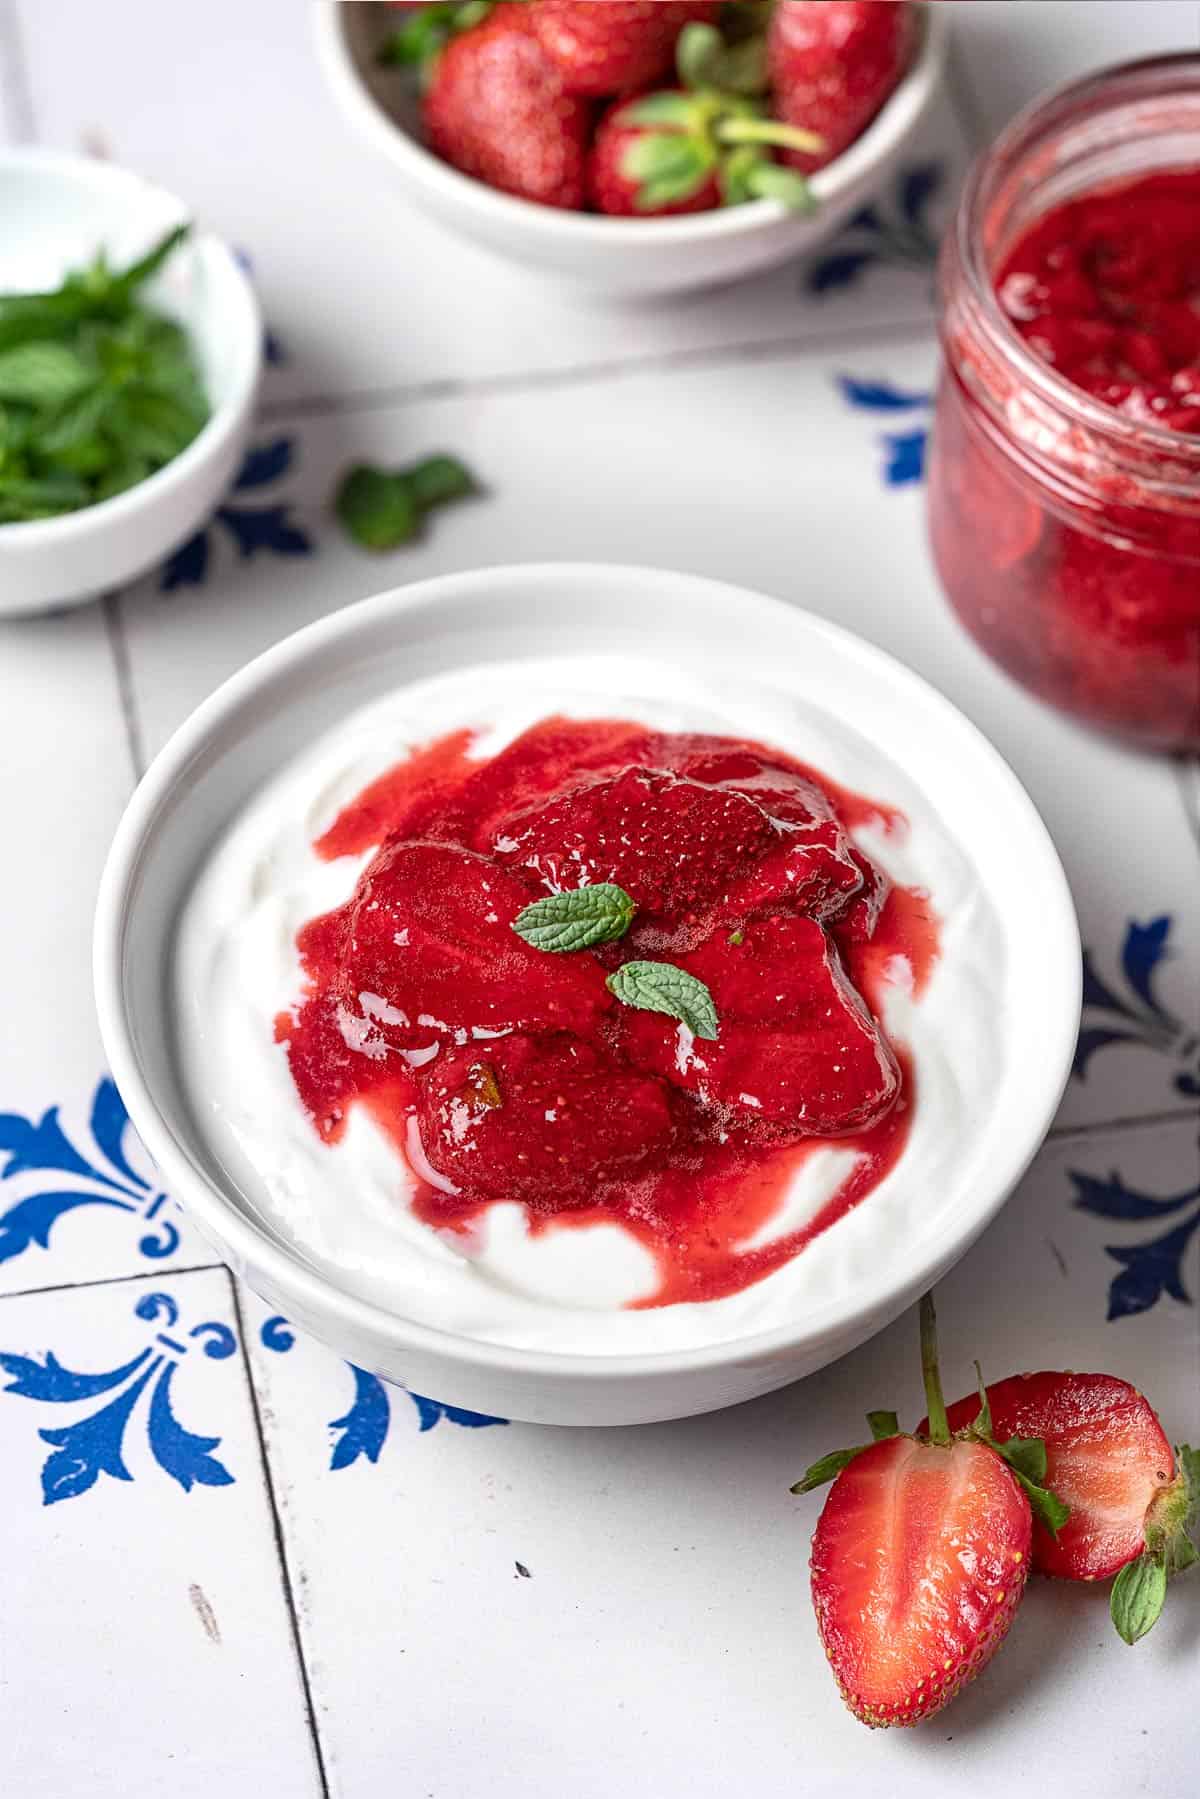 yogurt topped with strawberry compote in a bowl next to 2 strawberry halves, a jar of strawberry compote, a bowl of strawberries and a bowl of mint.